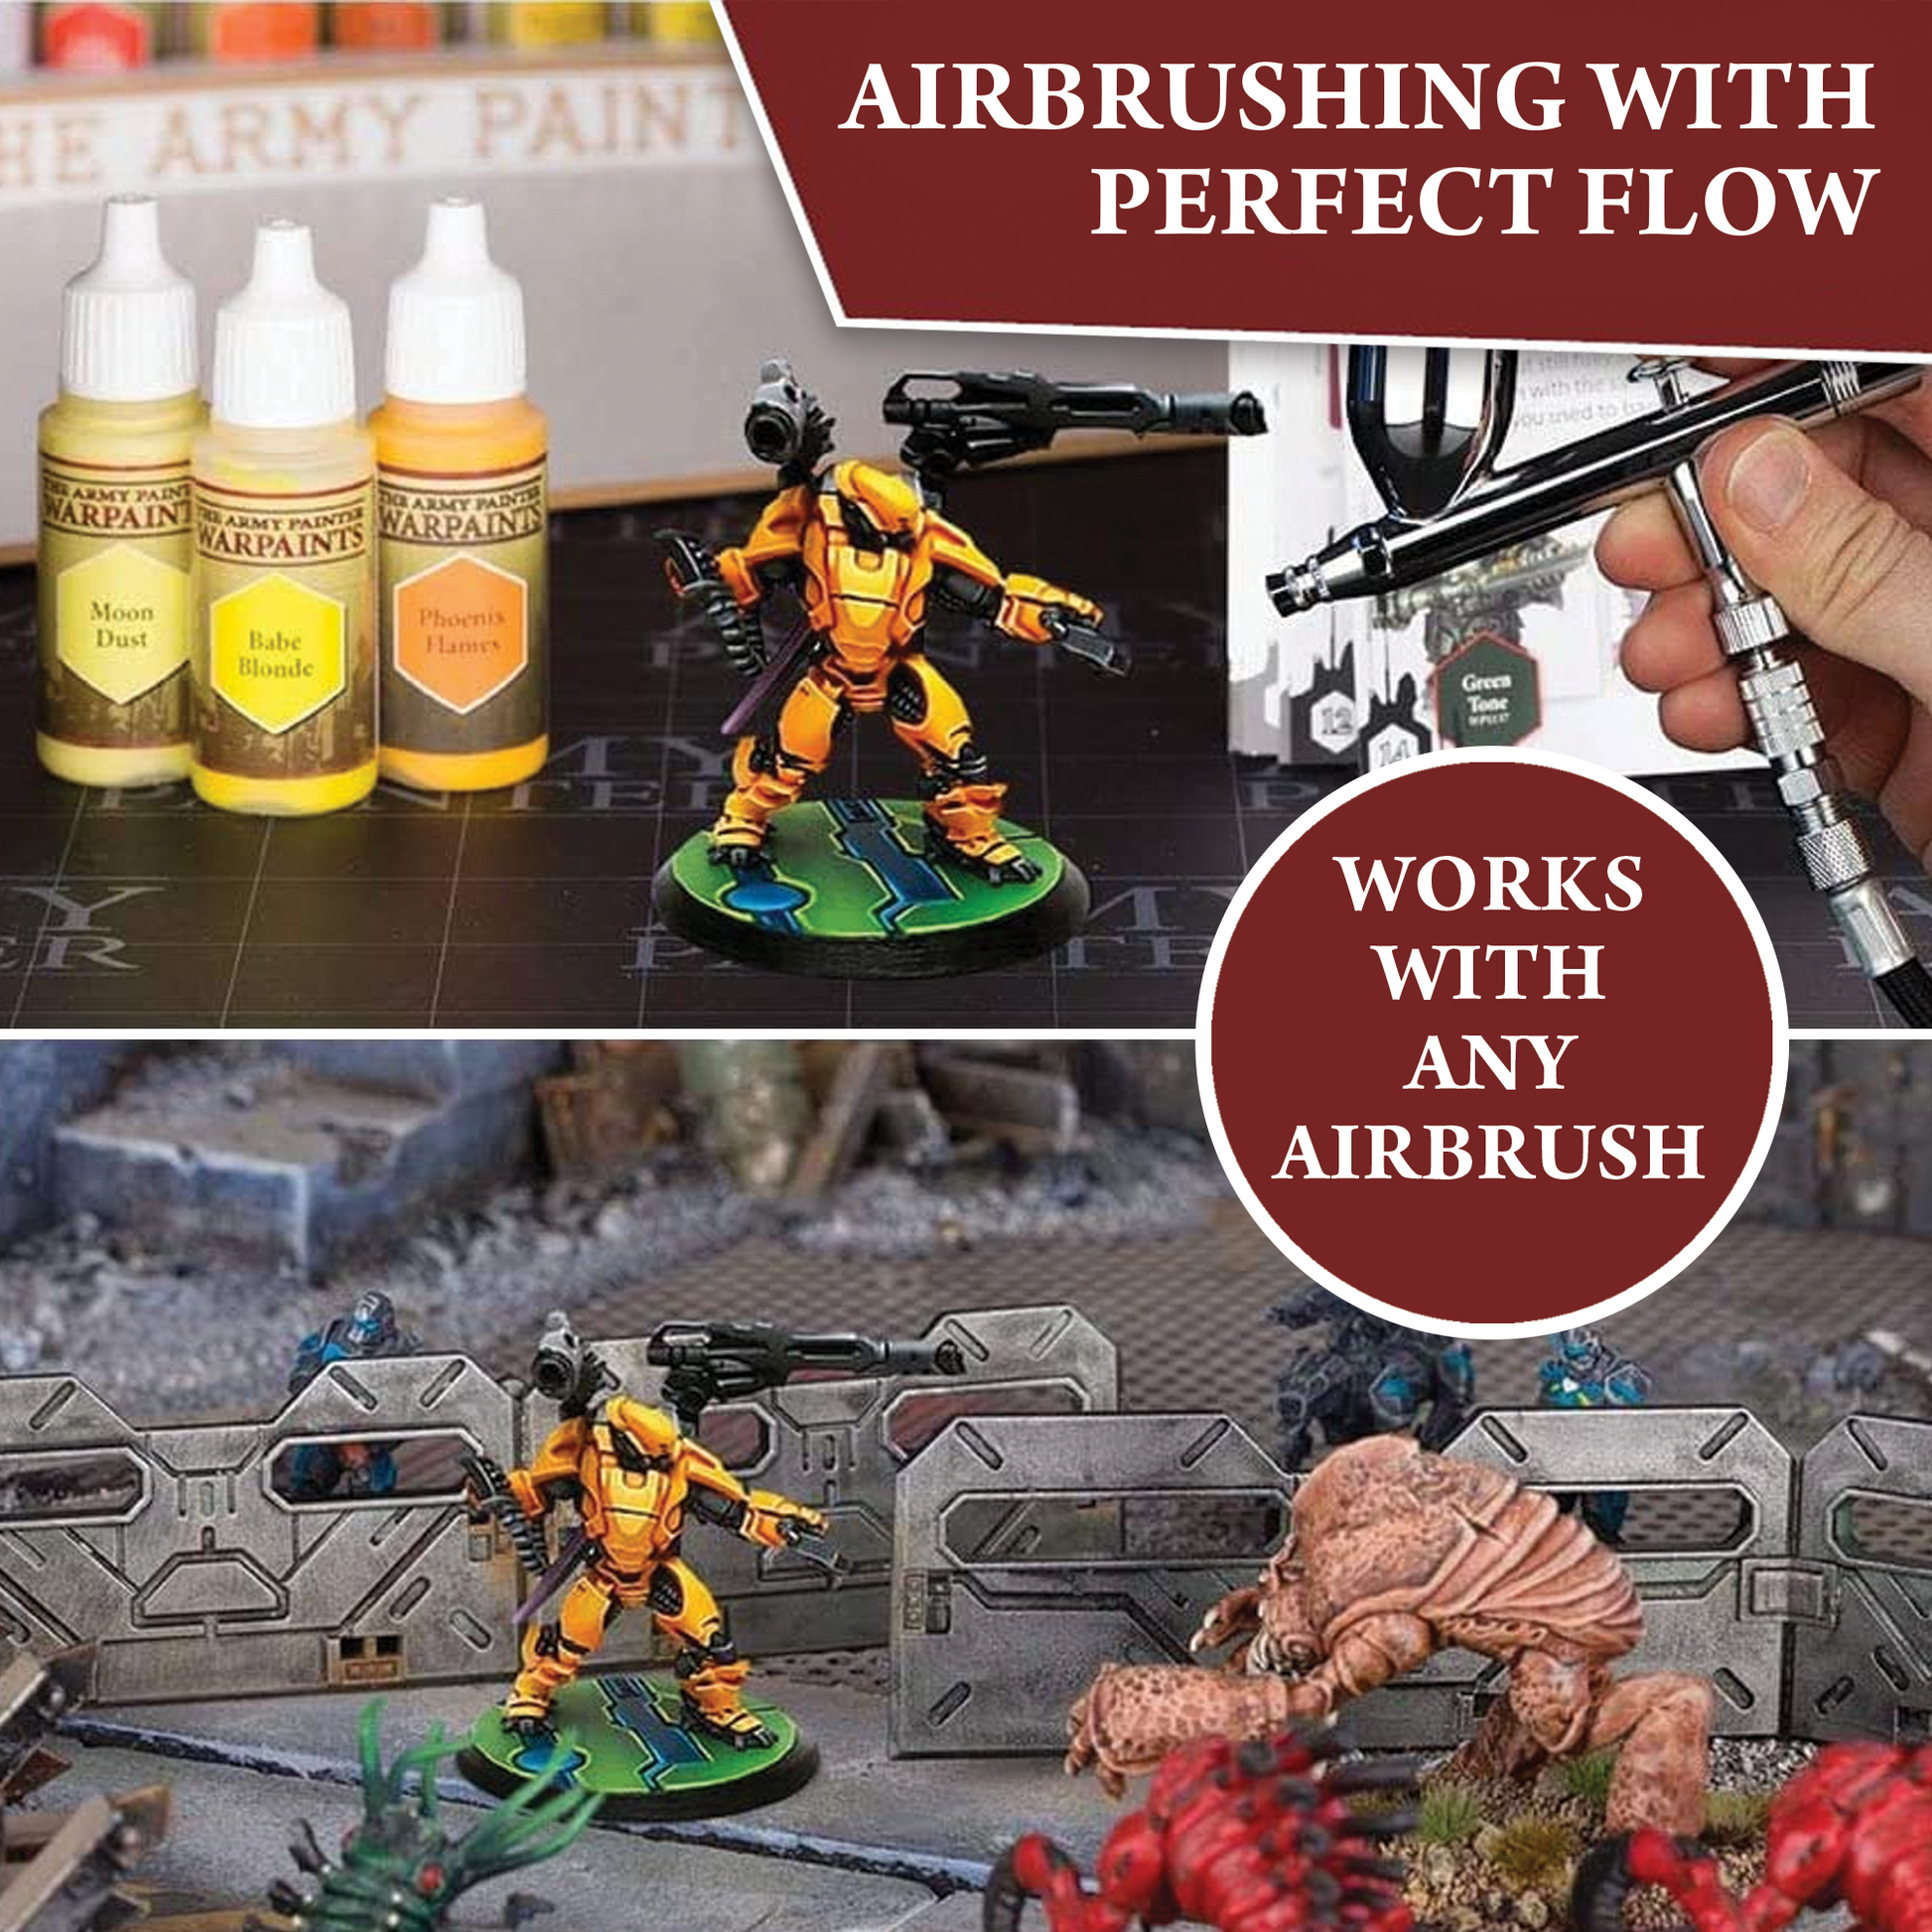 The Army Painter - Warpaints Air Upgrade from Mega to Complete Set –  Wargames Delivered